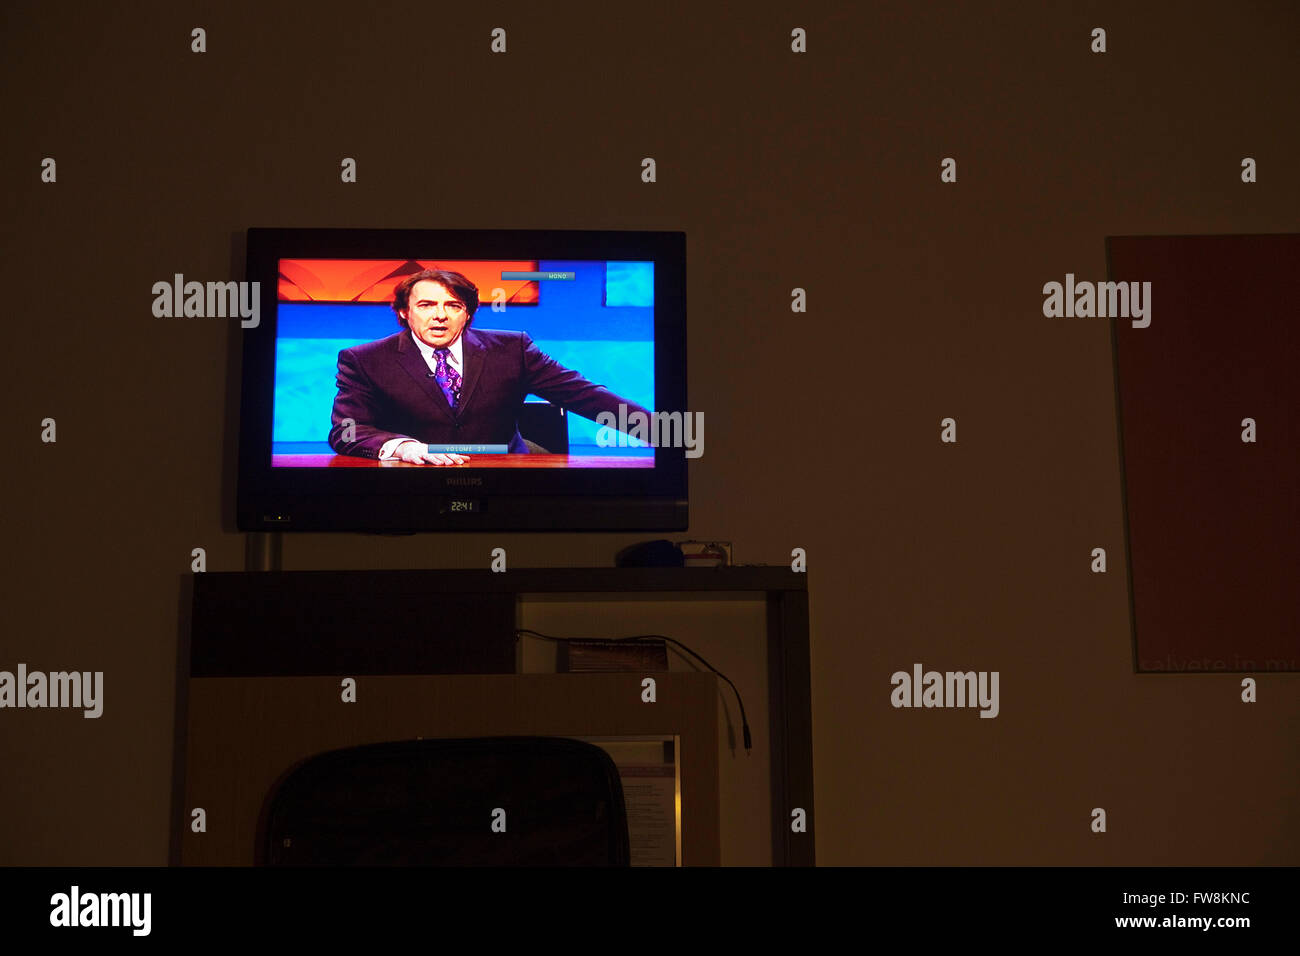 Jonathan Ross Tv and radio presenter and celebrity seen here as a portrait on a flat panel TV. Stock Photo